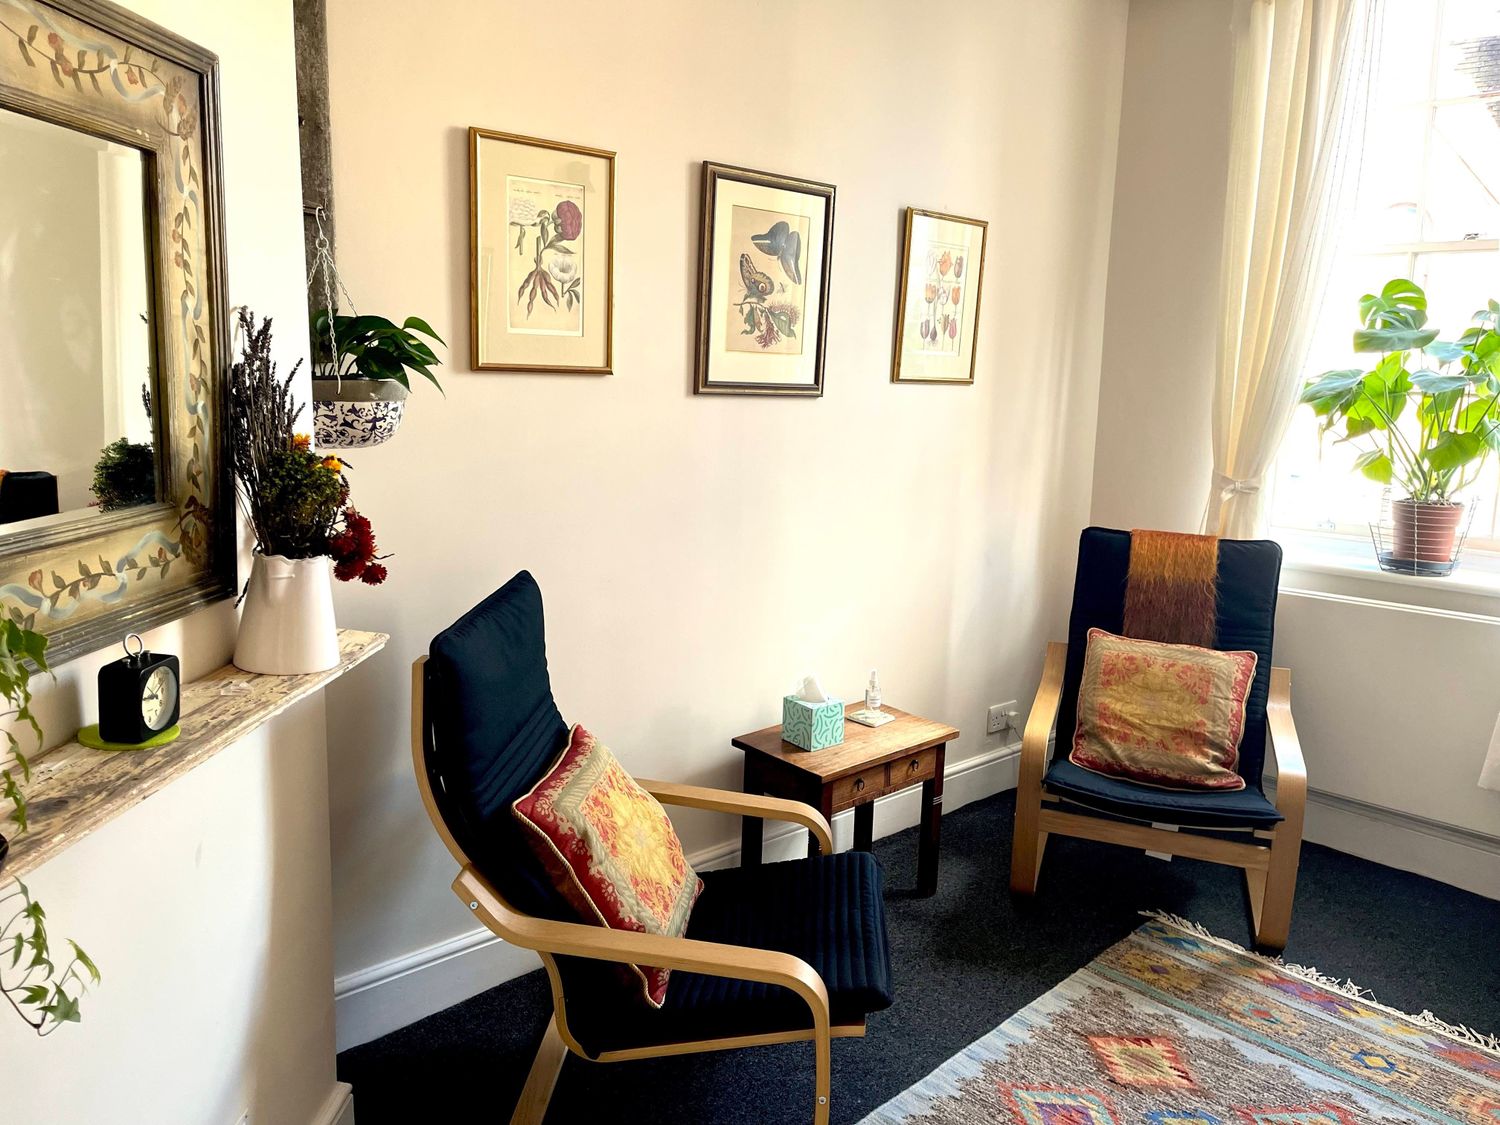 Gallery Photo of Therapy room, Richmond, London UK